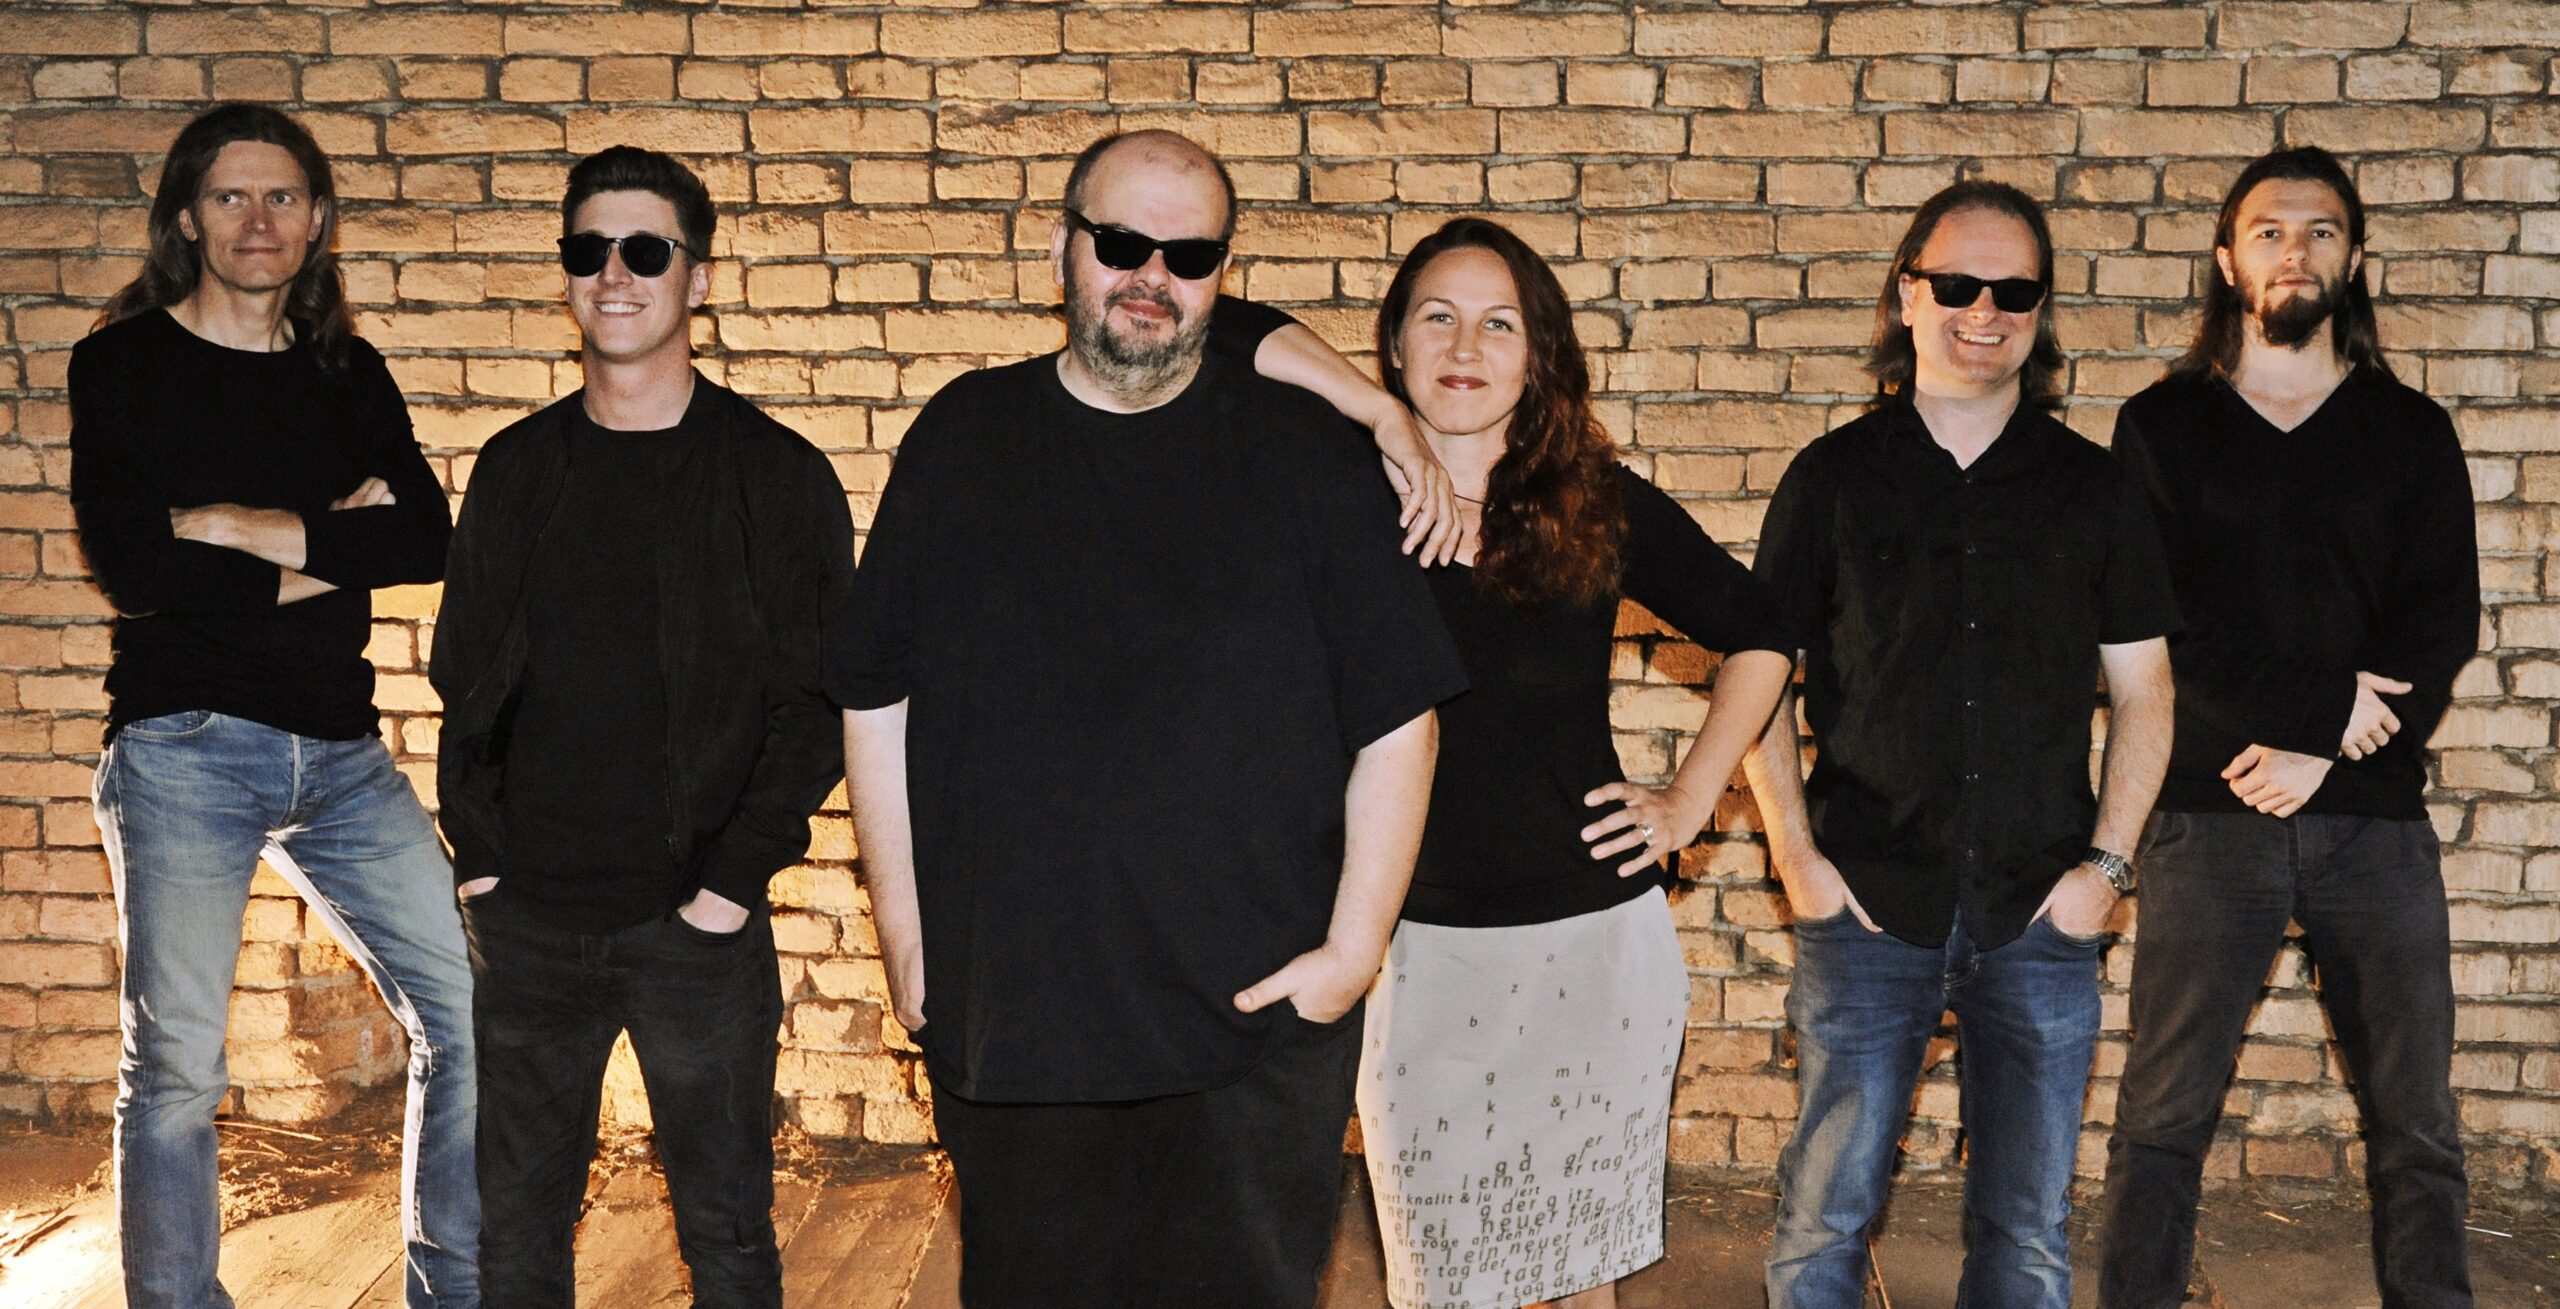 You are currently viewing Samstag, 16.09.23 – Badrock Blues Band – Einlass: 19.30 Uhr